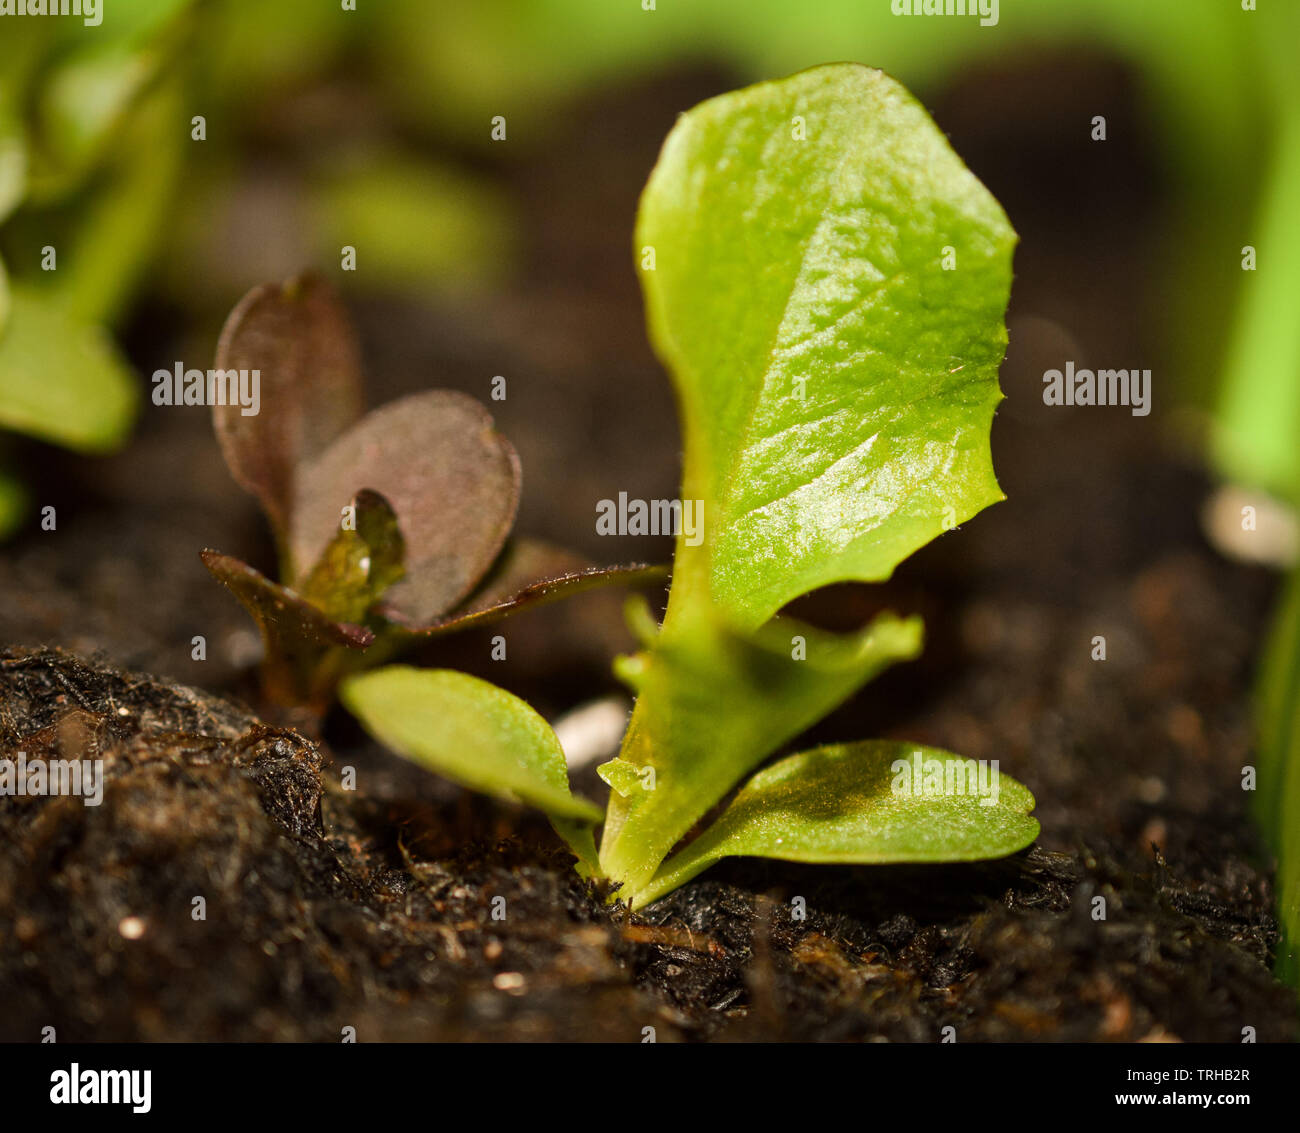 Tiny green edible lettuce seedling grows in compost Stock Photo